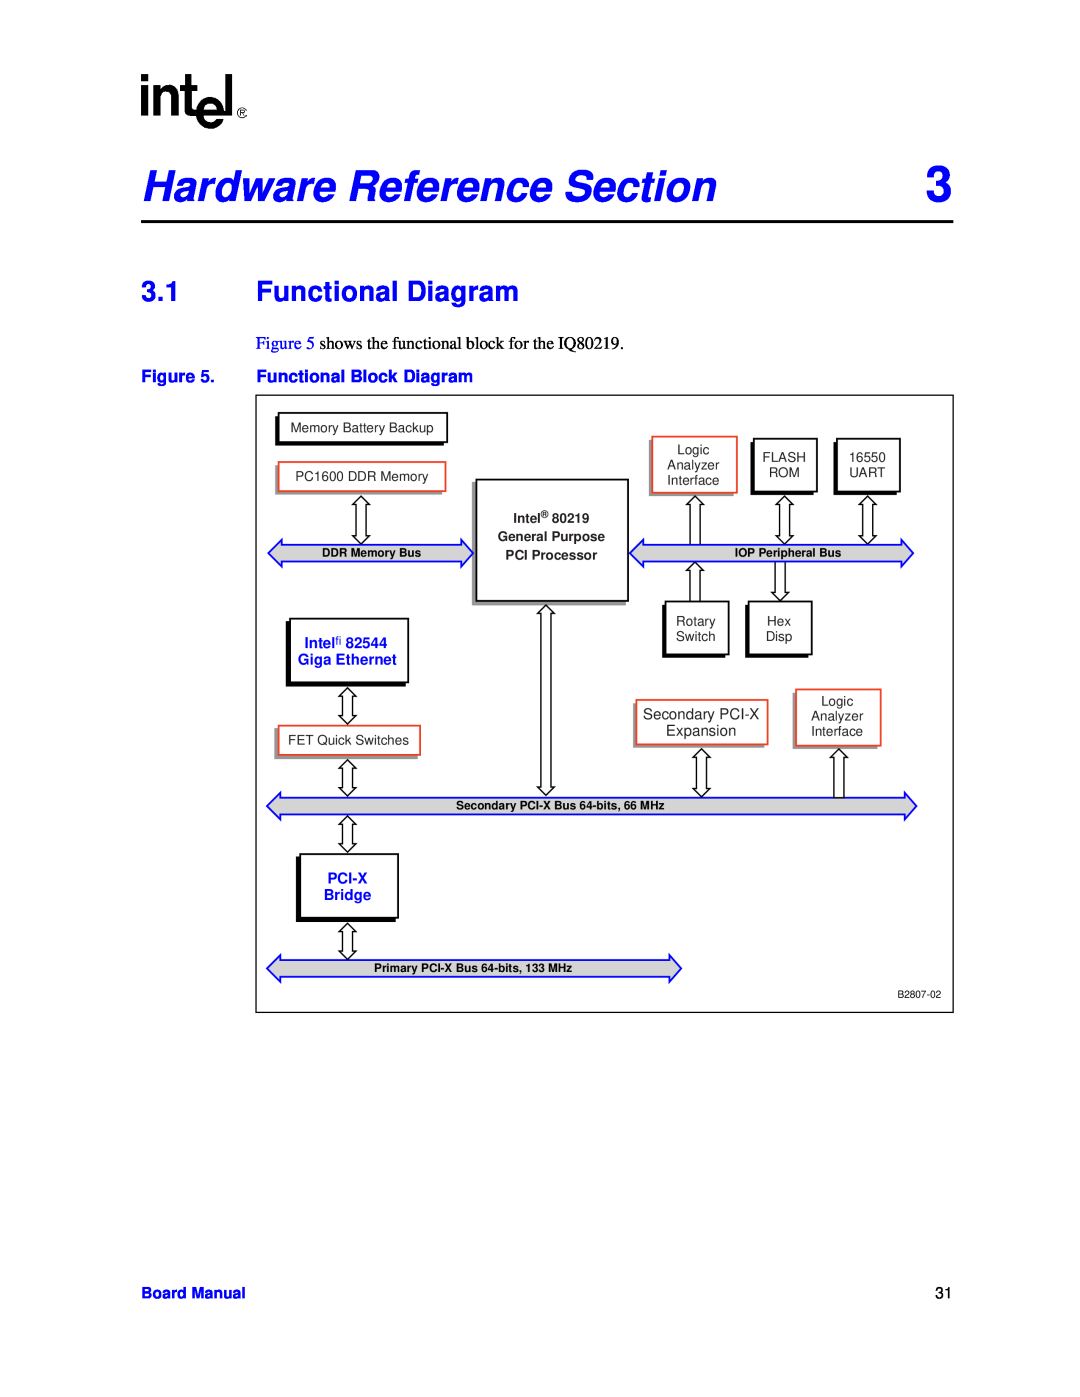 Intel IQ80219 Hardware Reference Section, Functional Diagram, Functional Block Diagram, Board Manual, Secondary PCI-X 